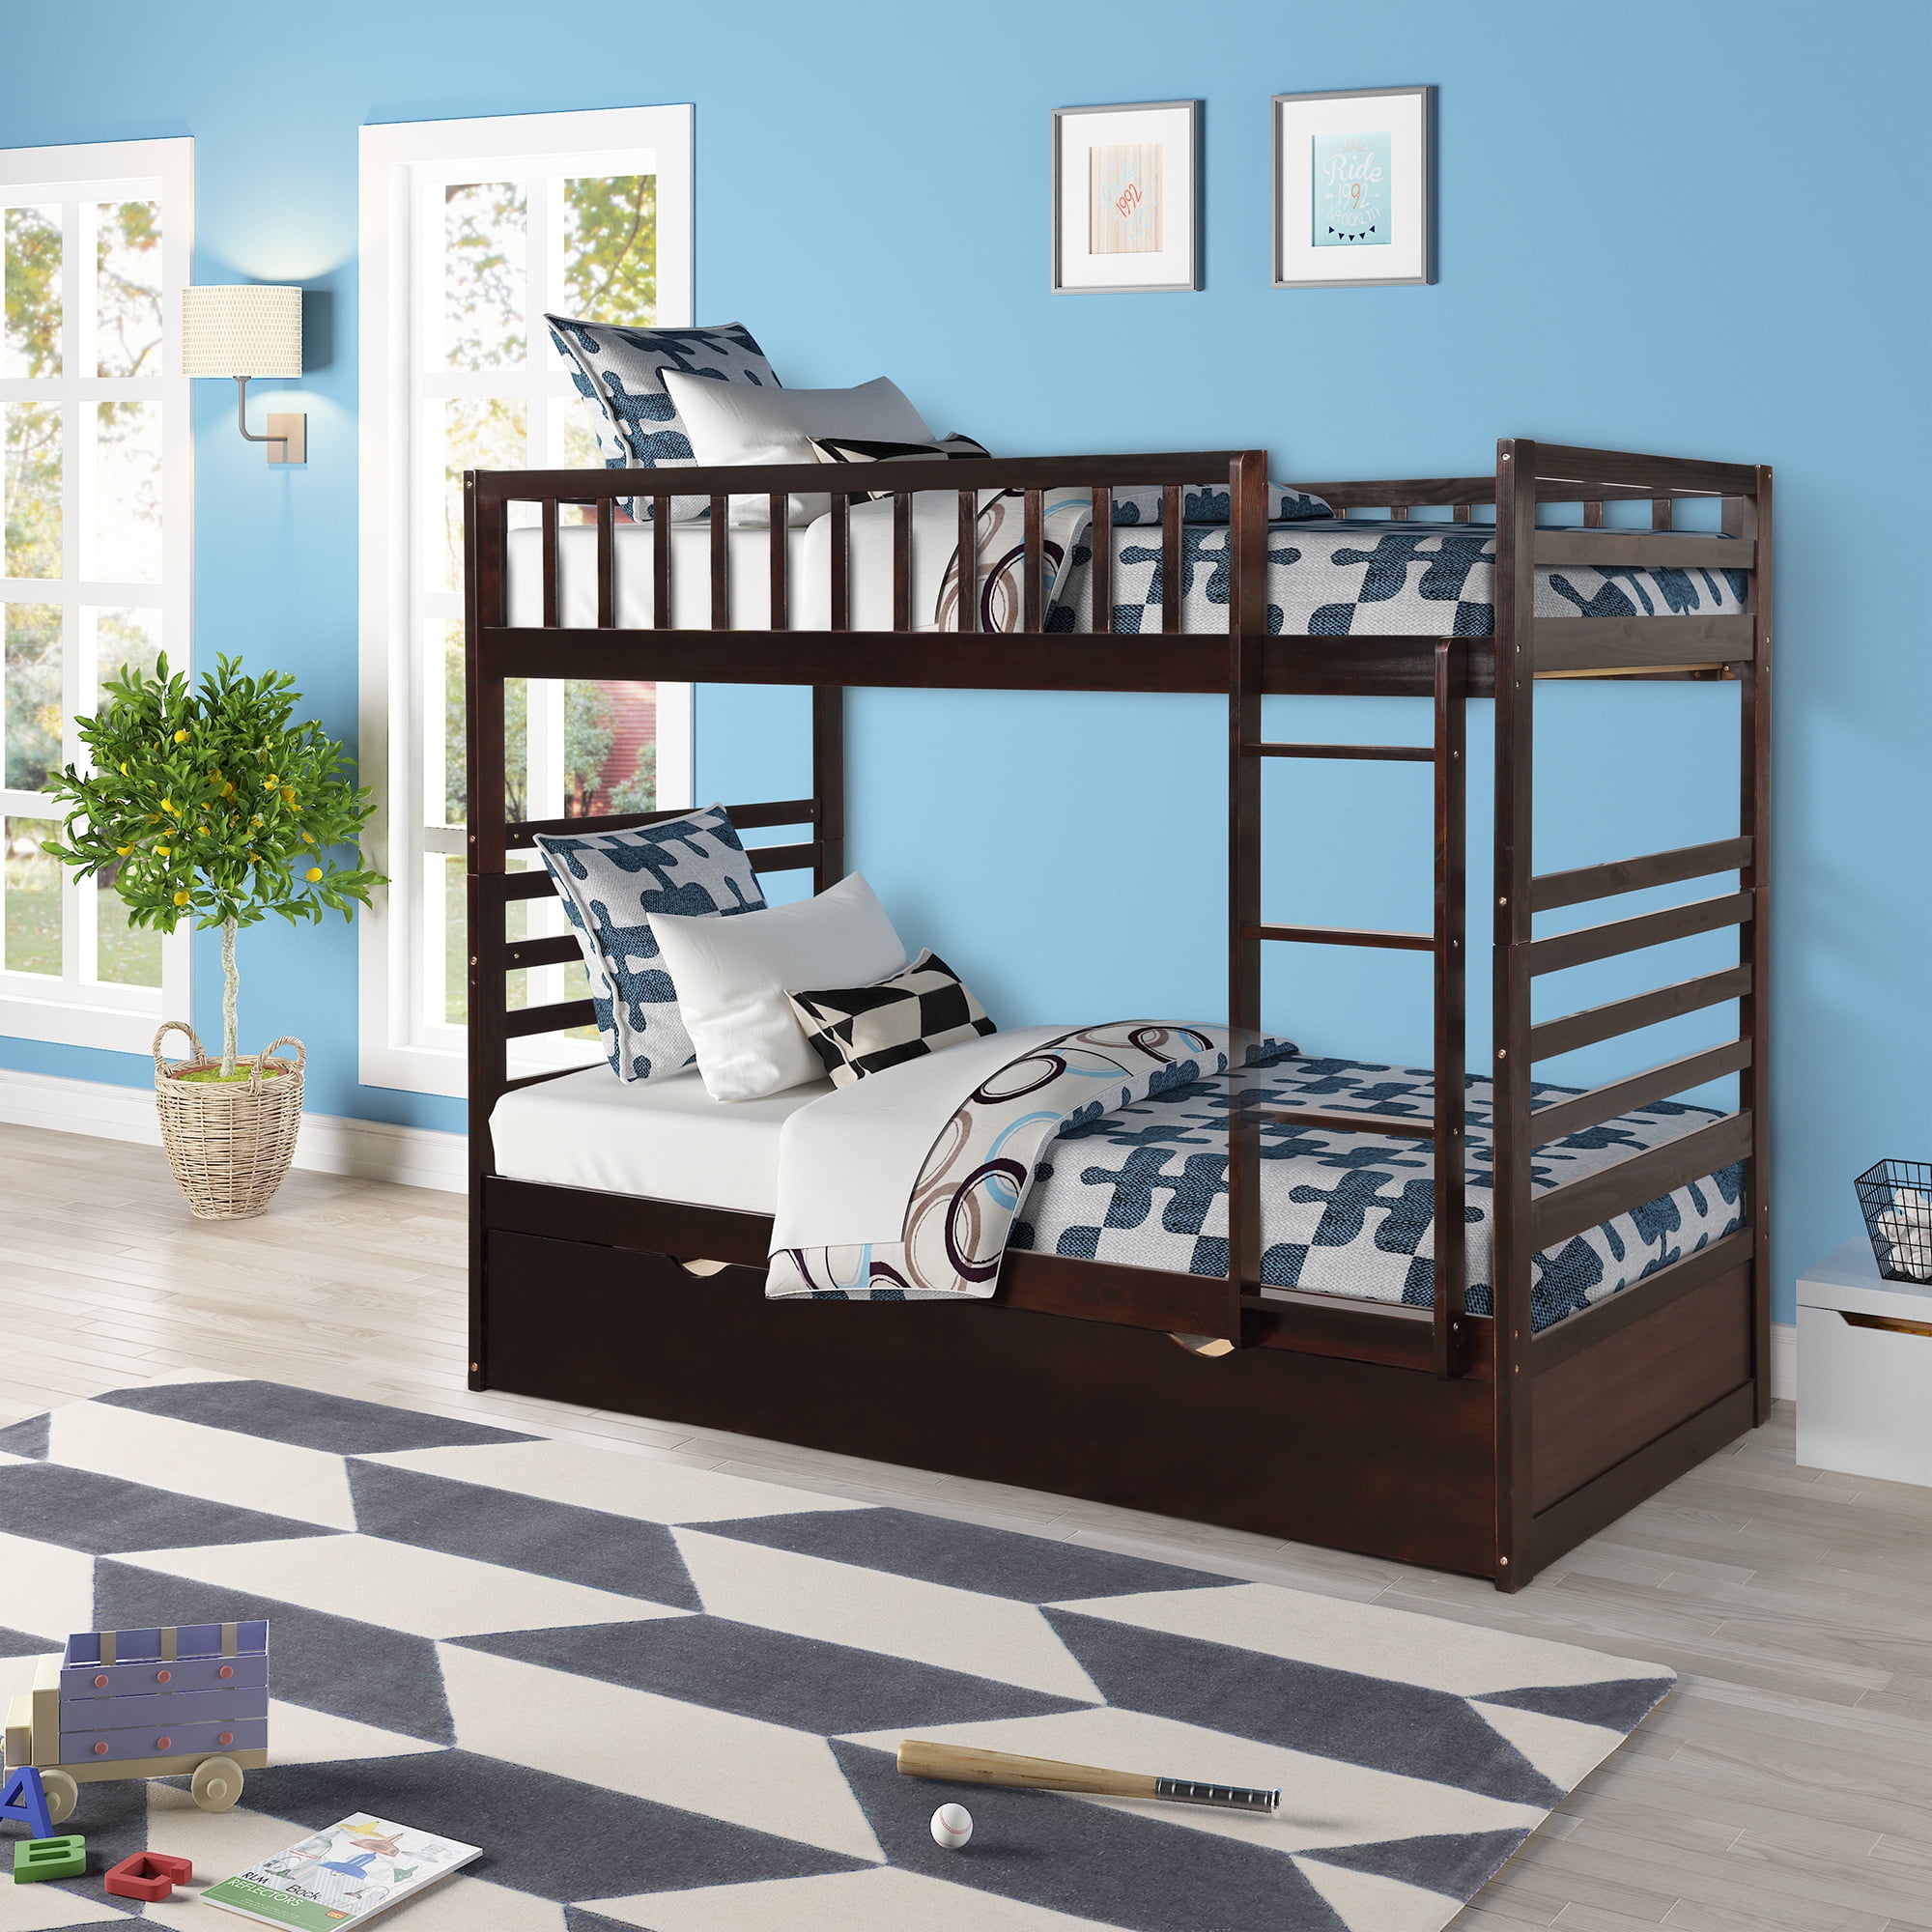 detachable twin over full bunk beds